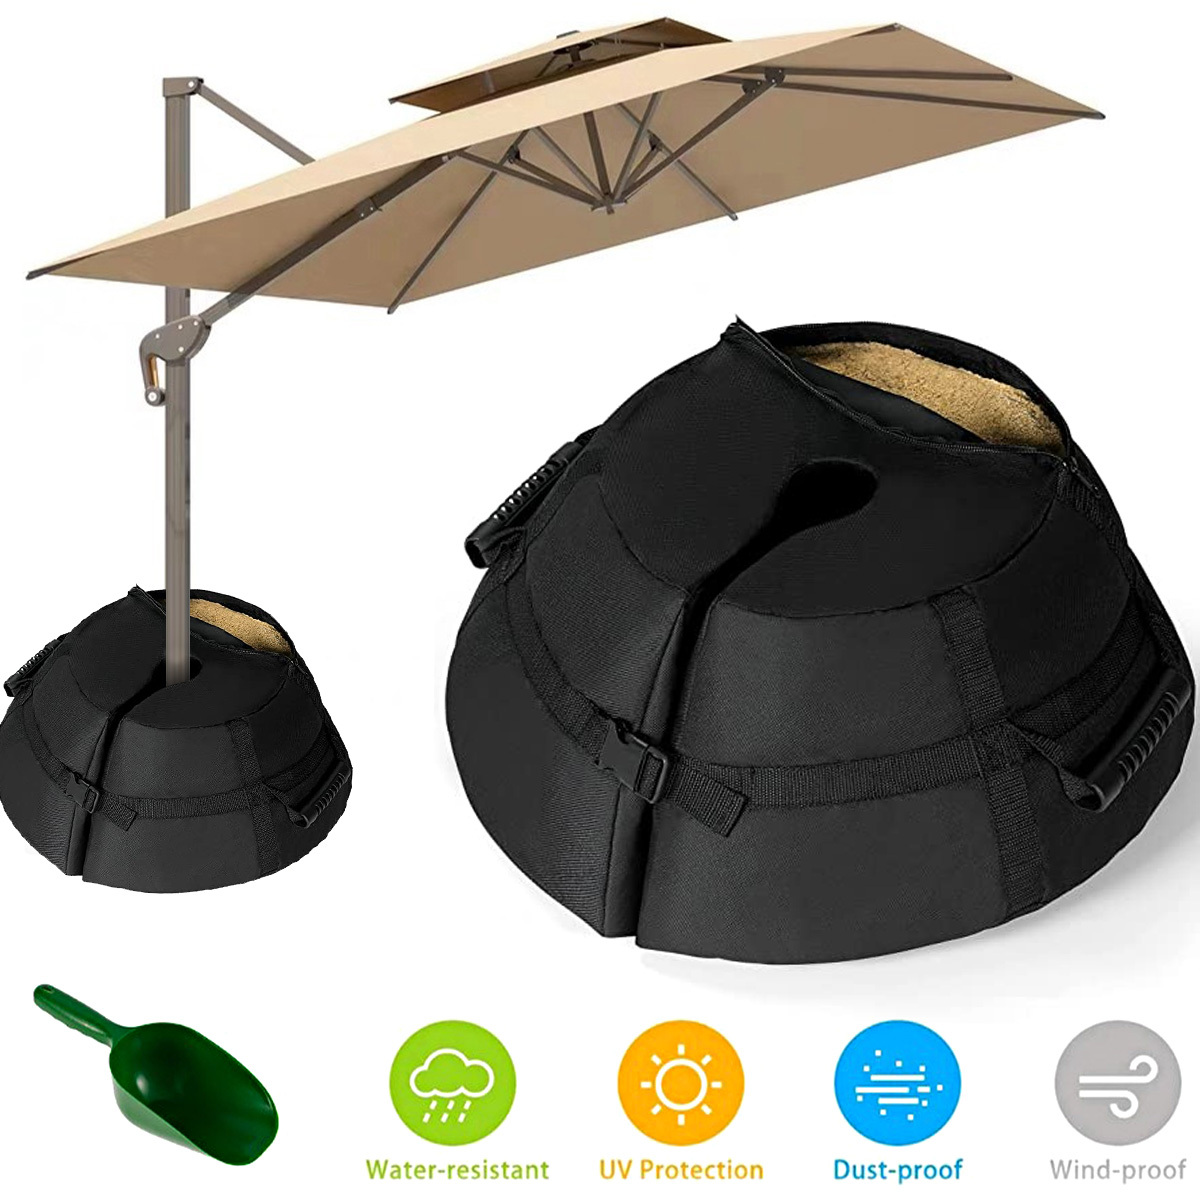 A bag that holds your umbrella.